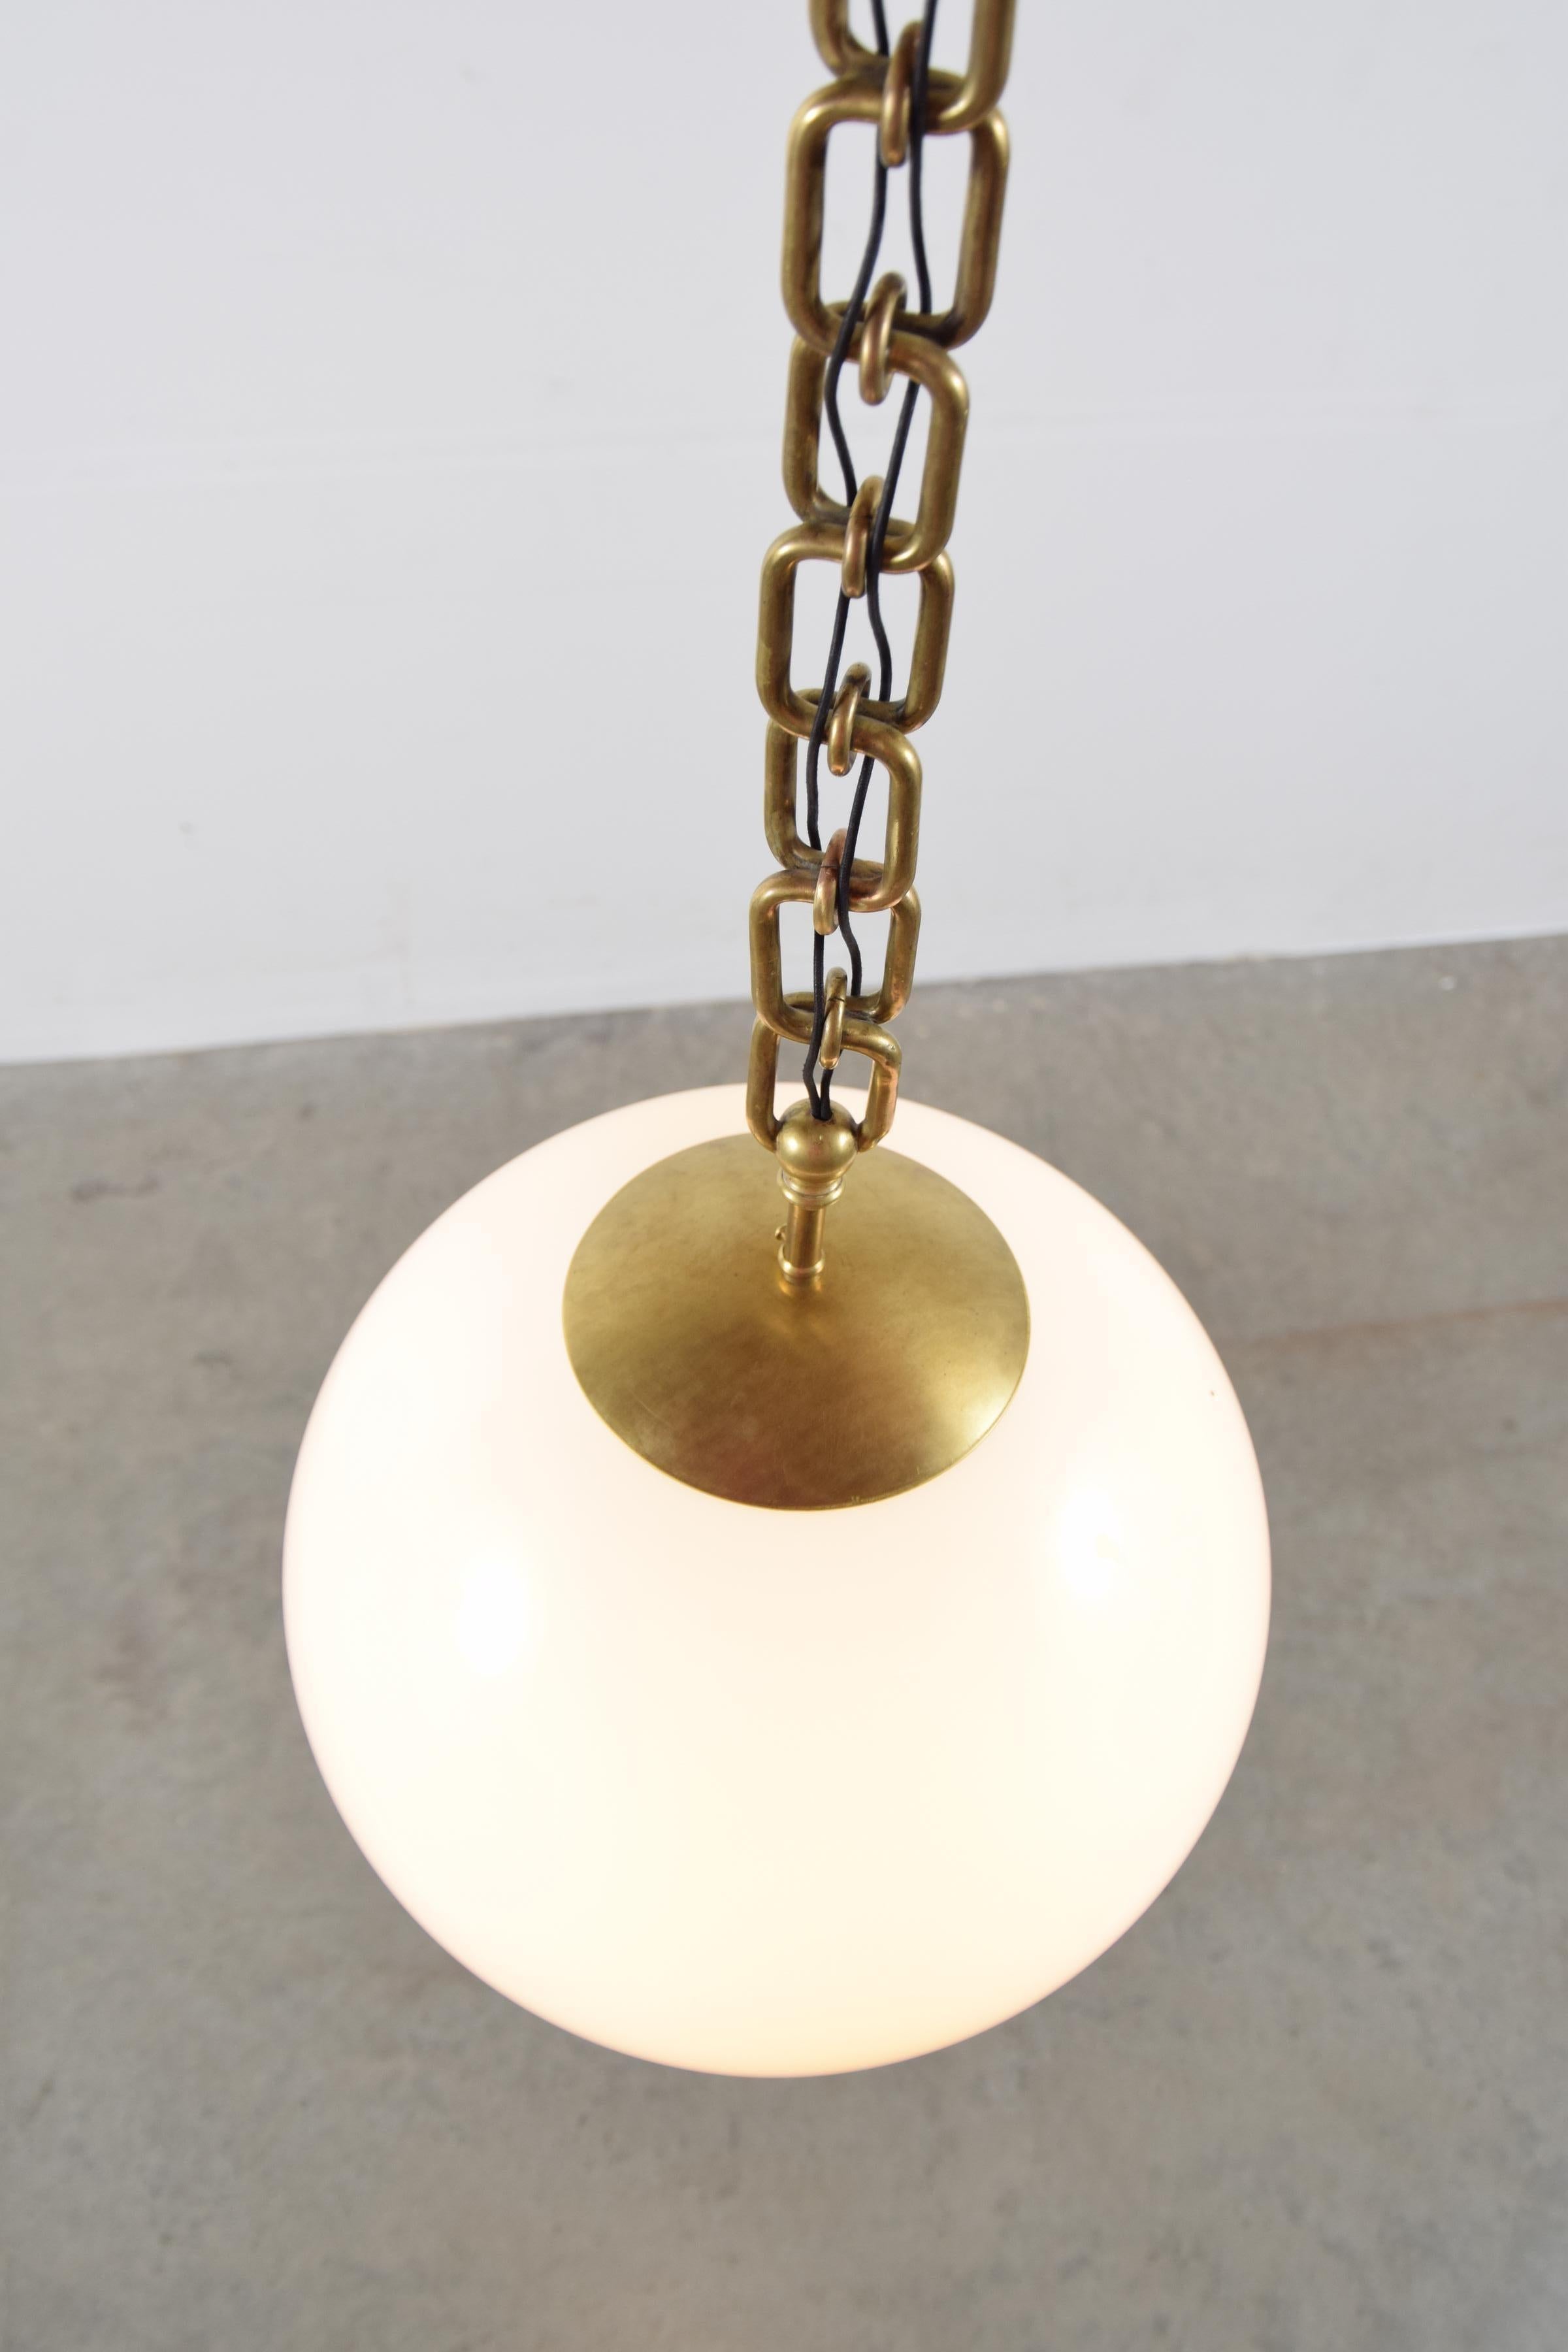 American Antique Faux Brass Chain and Milk Glass Sphere Pendant Light